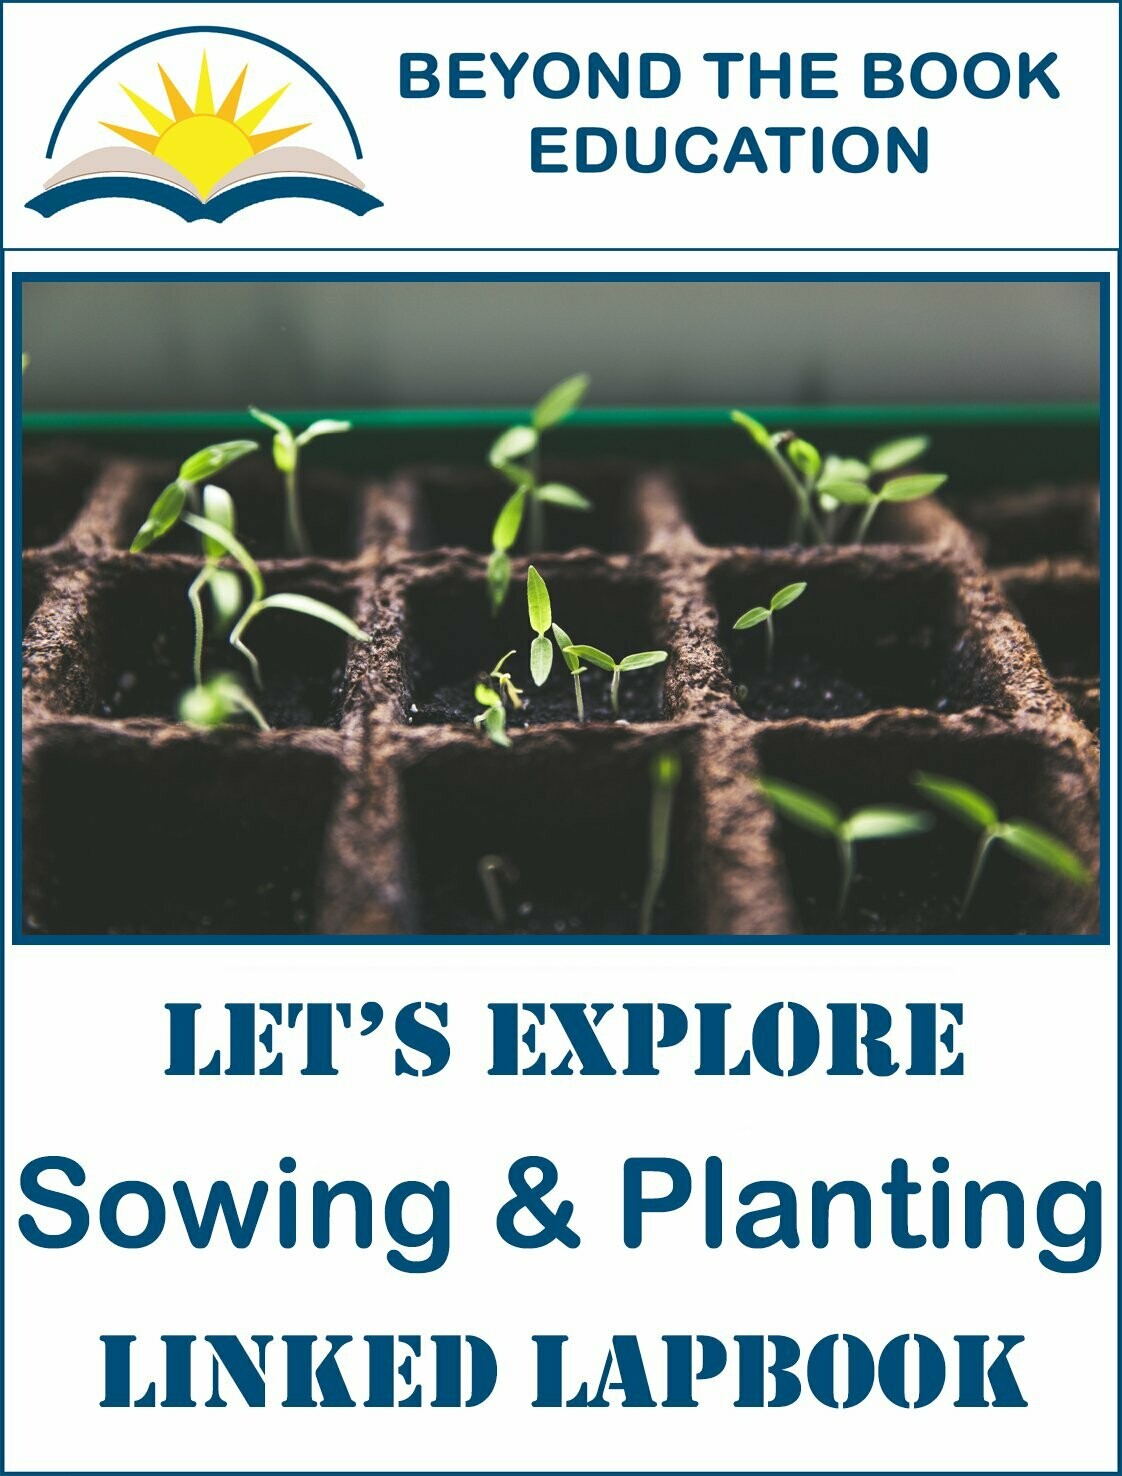 Sowing & Planting Linked Lapbook